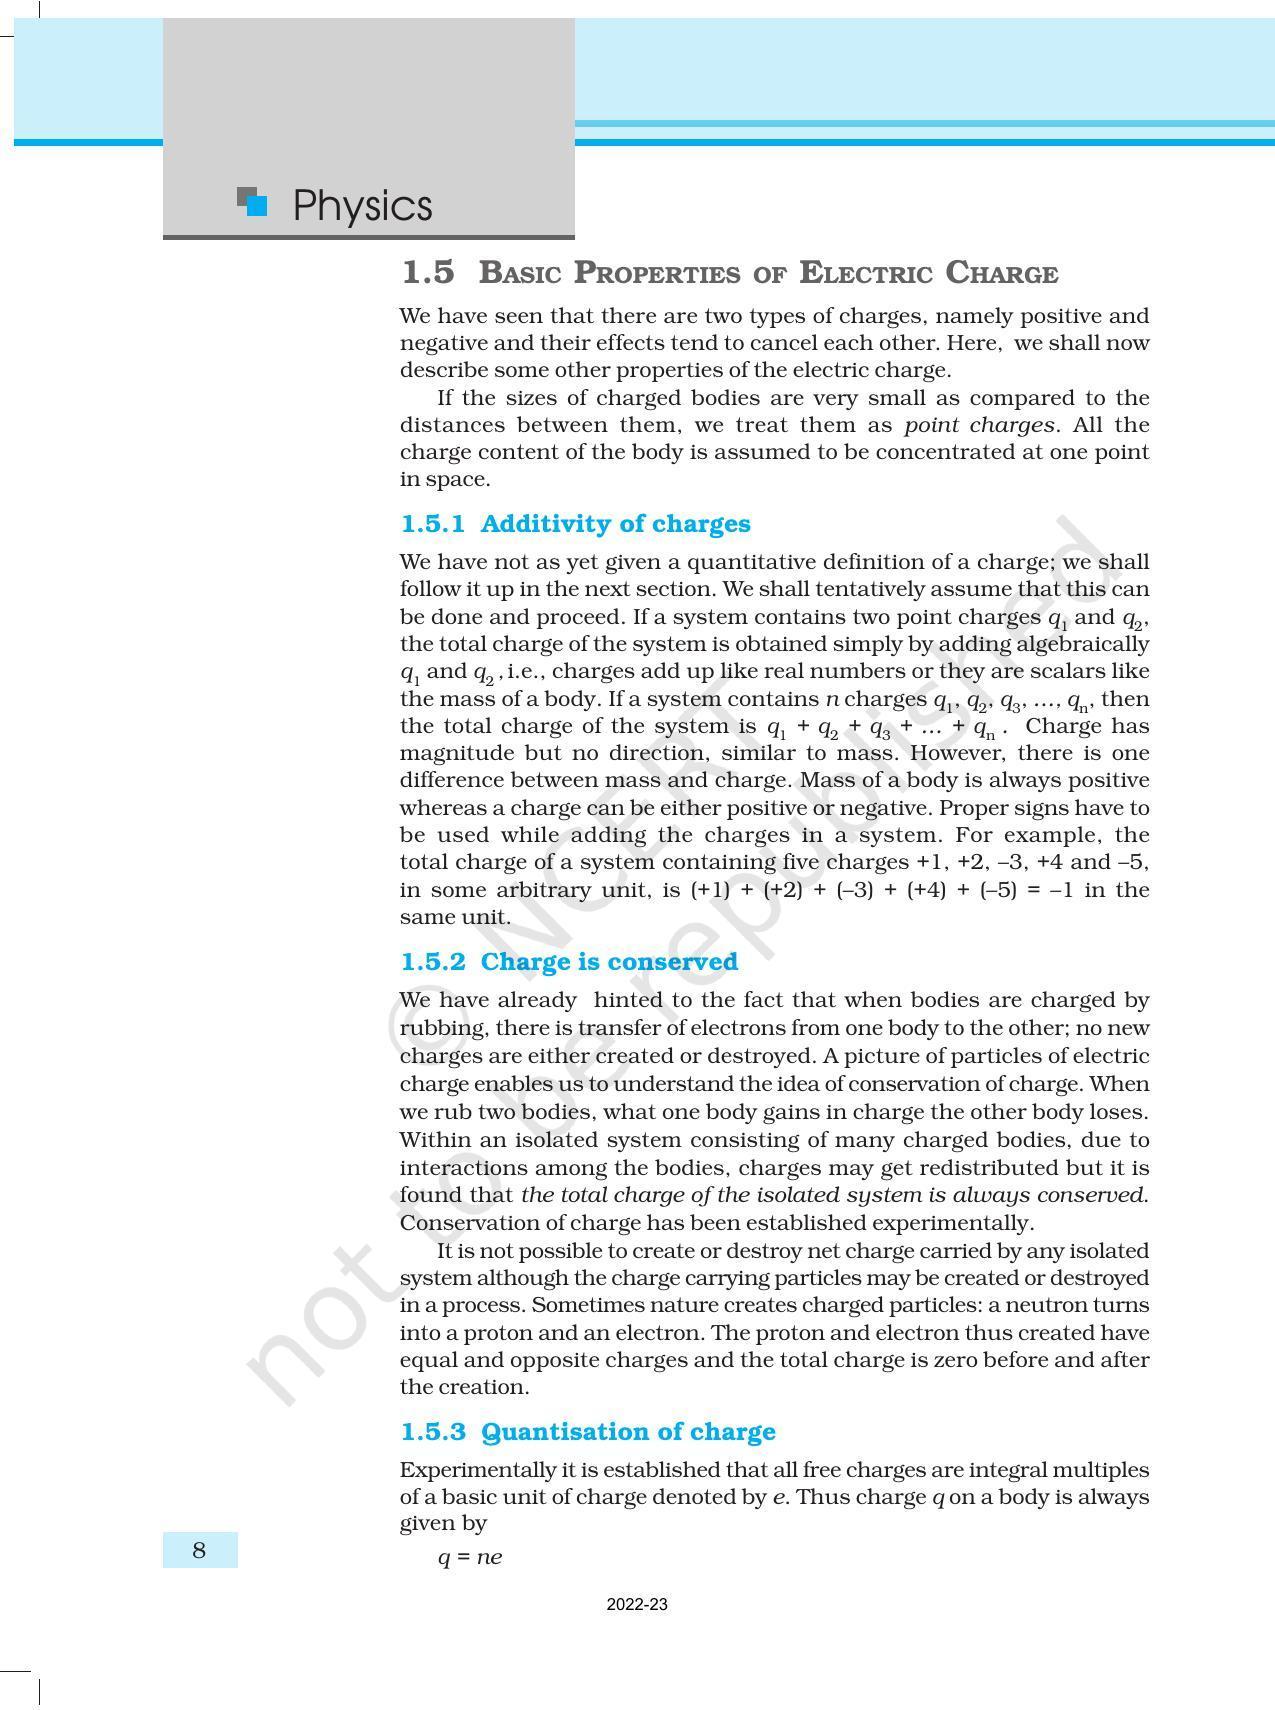 NCERT Book for Class 12 Physics Chapter 1 Electric Charges and Fields - Page 8